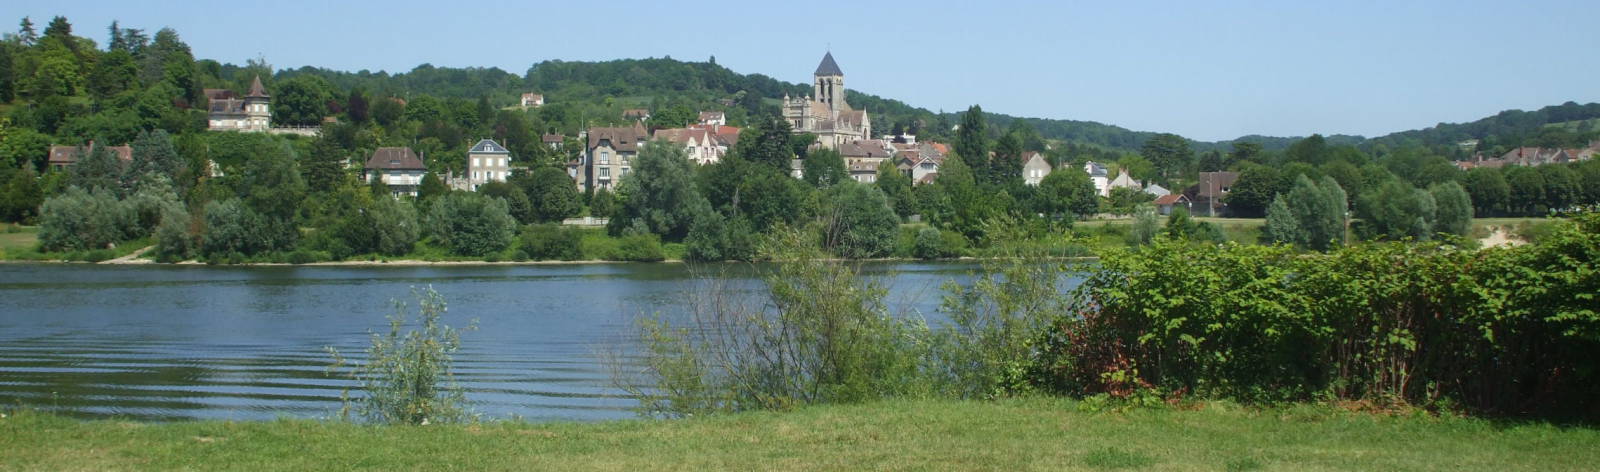 Vétheuil, home of Claude Monet, overlooking the Seine River in France.